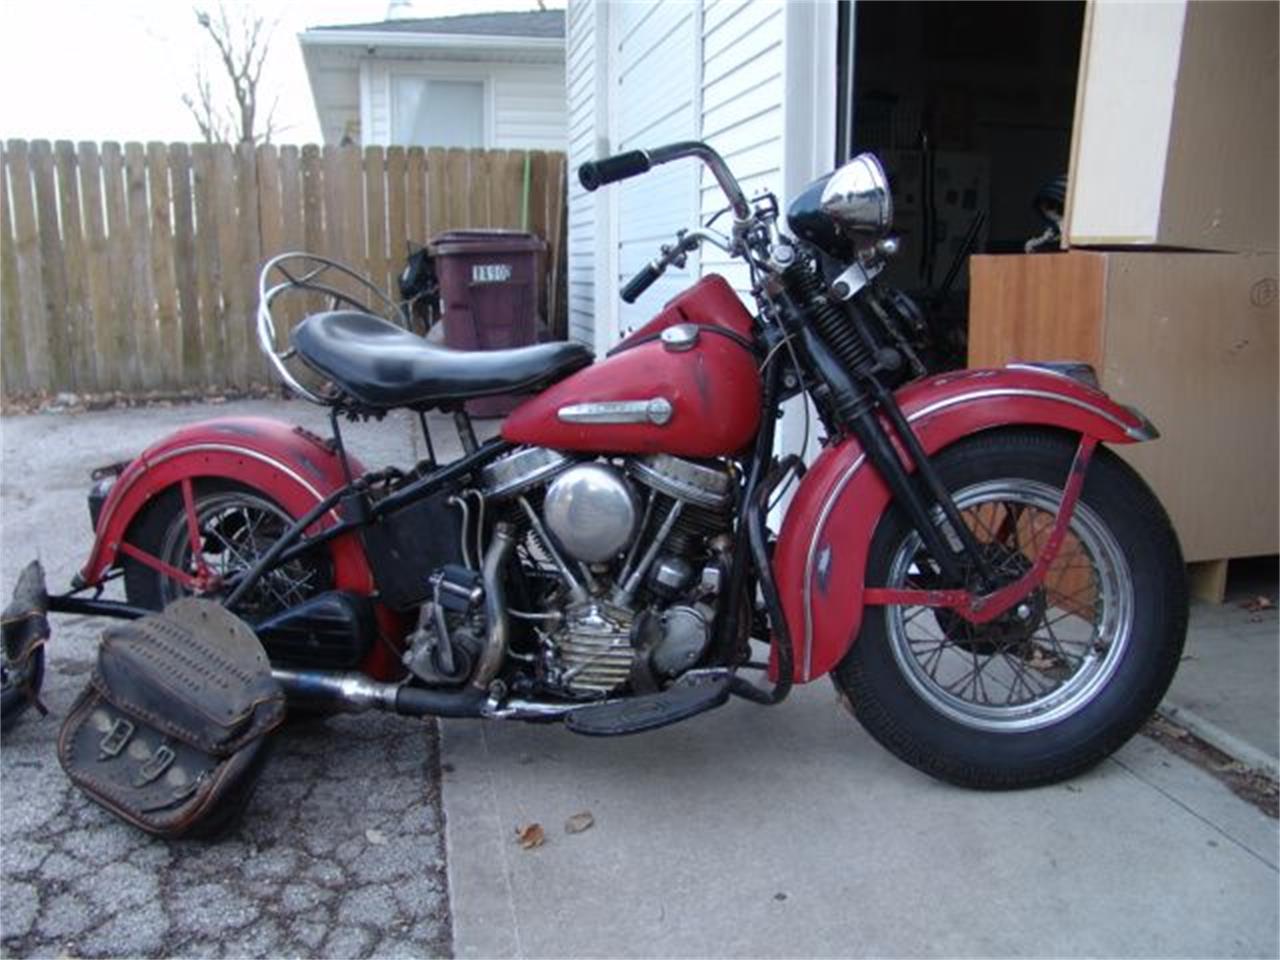 48 panhead for sale